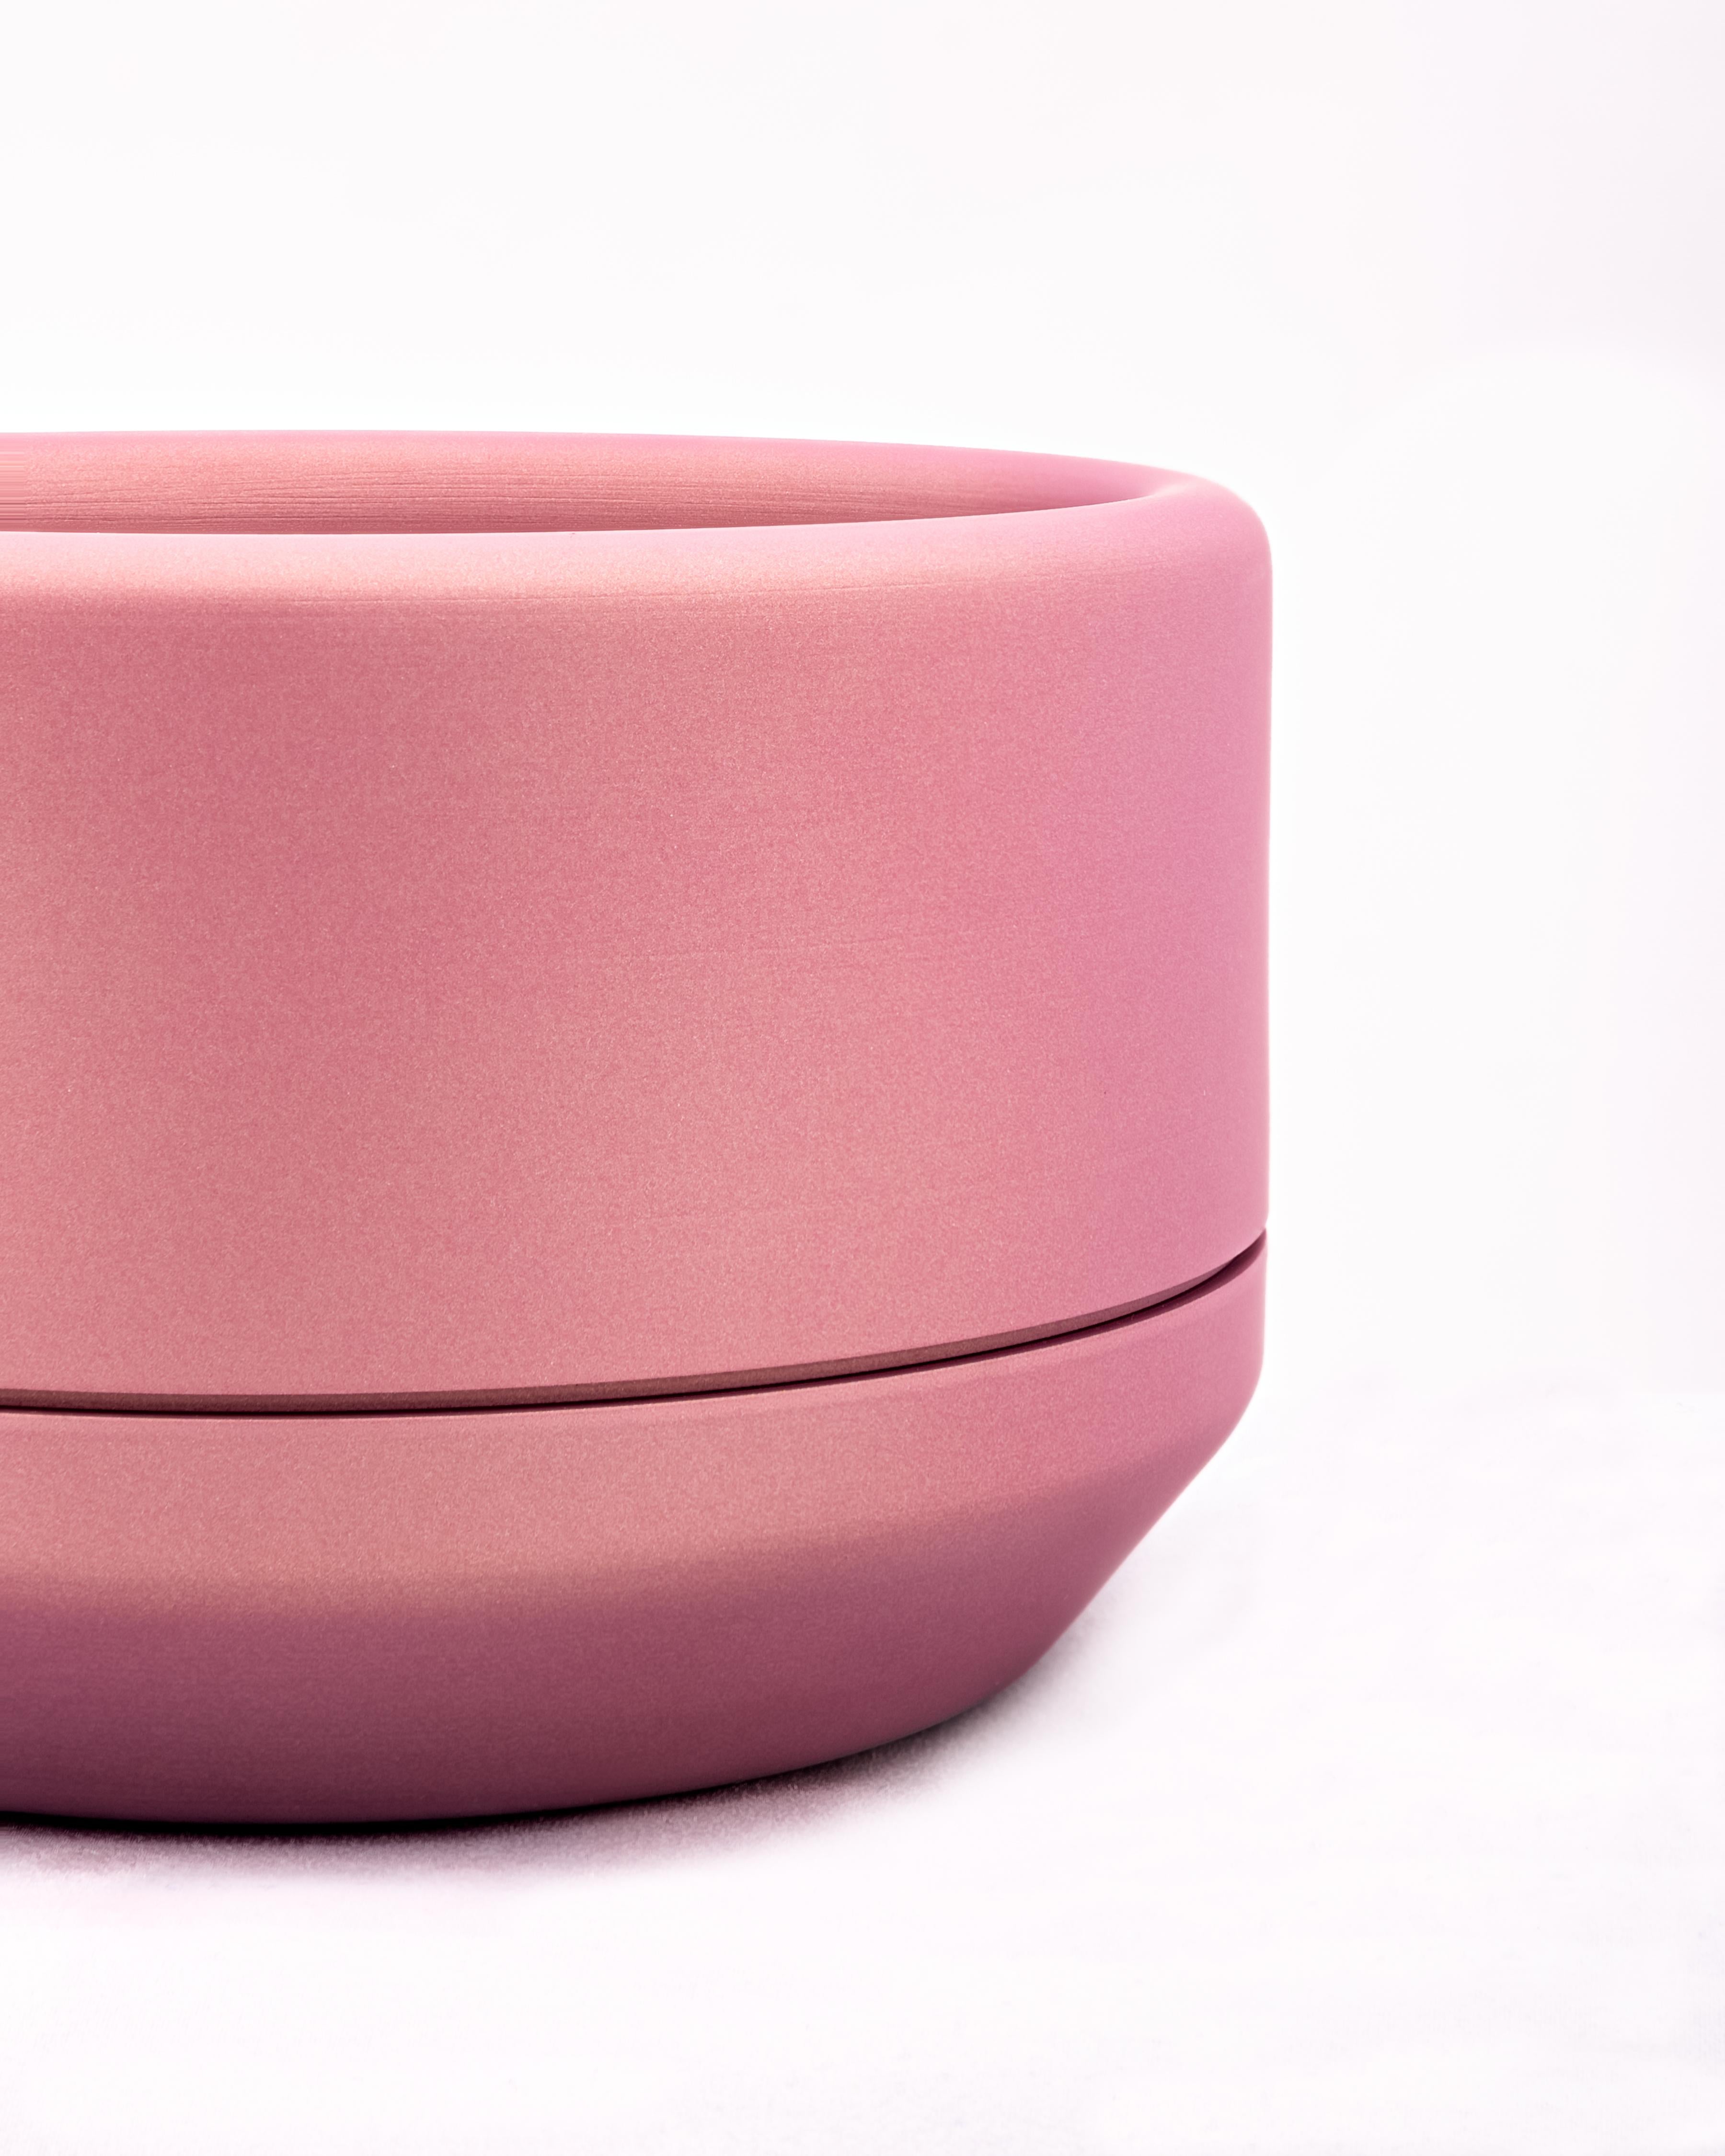 CNC milled and spun aluminum planter with pink ceramic coat finish. The main body of the planter is set on a loose spun aluminum drainage base. Interior dimensions are 5.5 inches diameter, and 2.75